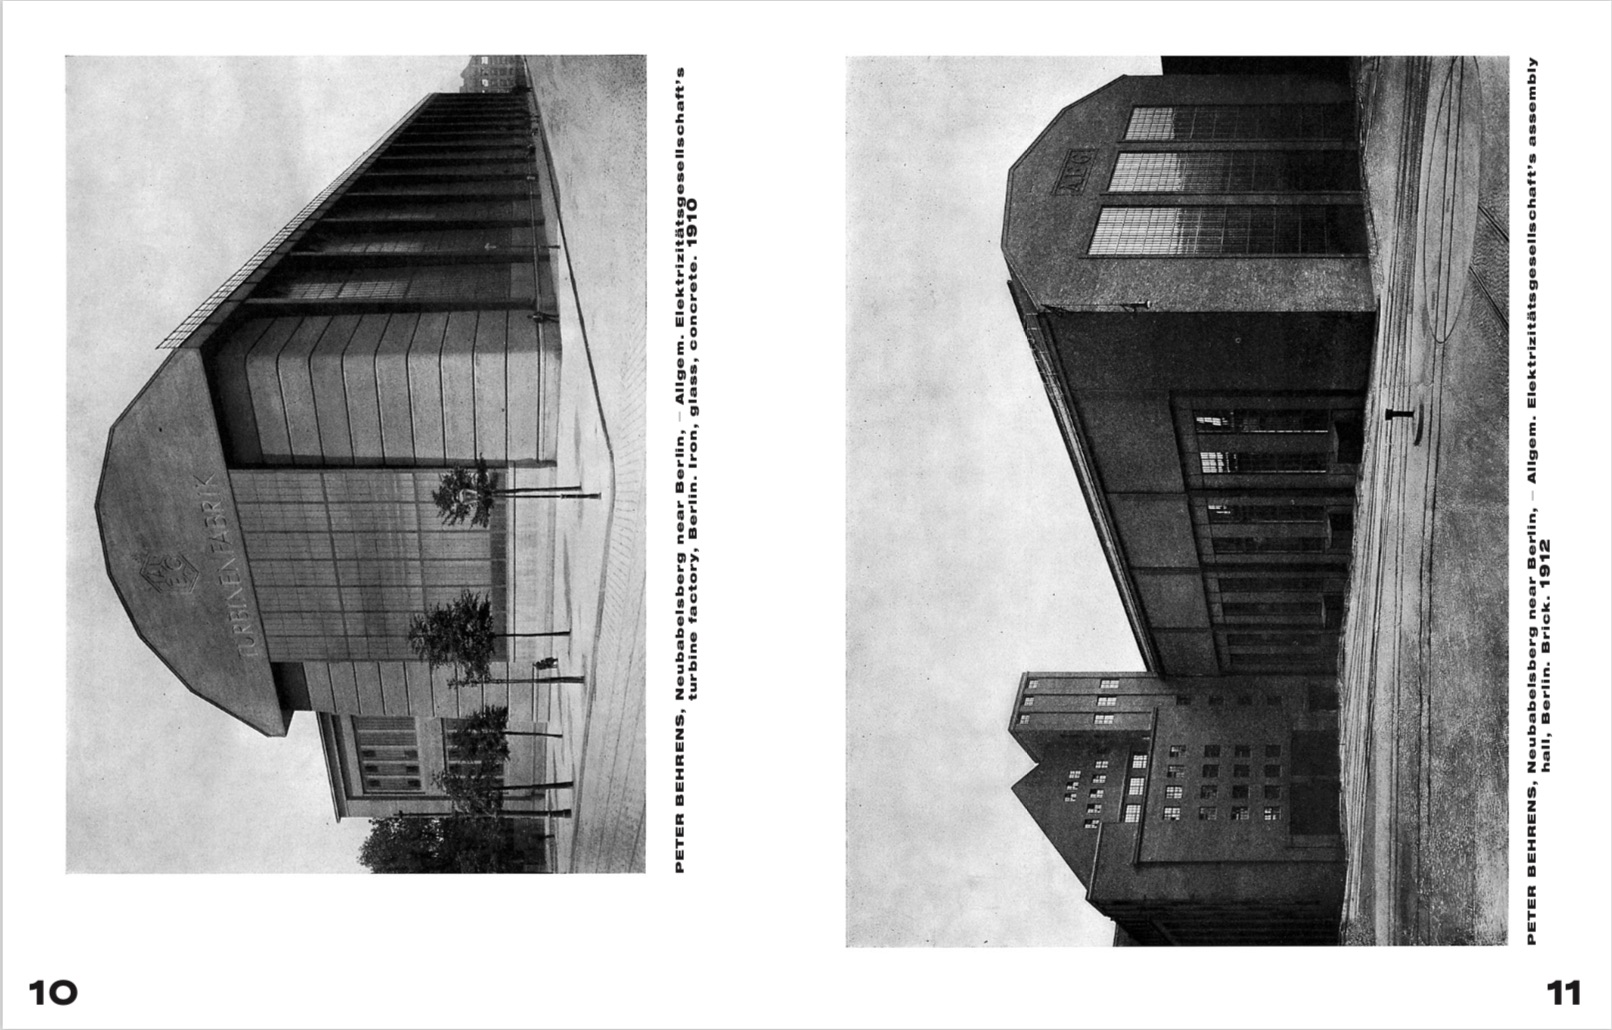 By Lars Muller Publishers from Walter Gropius. International Architecture copyright Lars Muller Publishers 2019